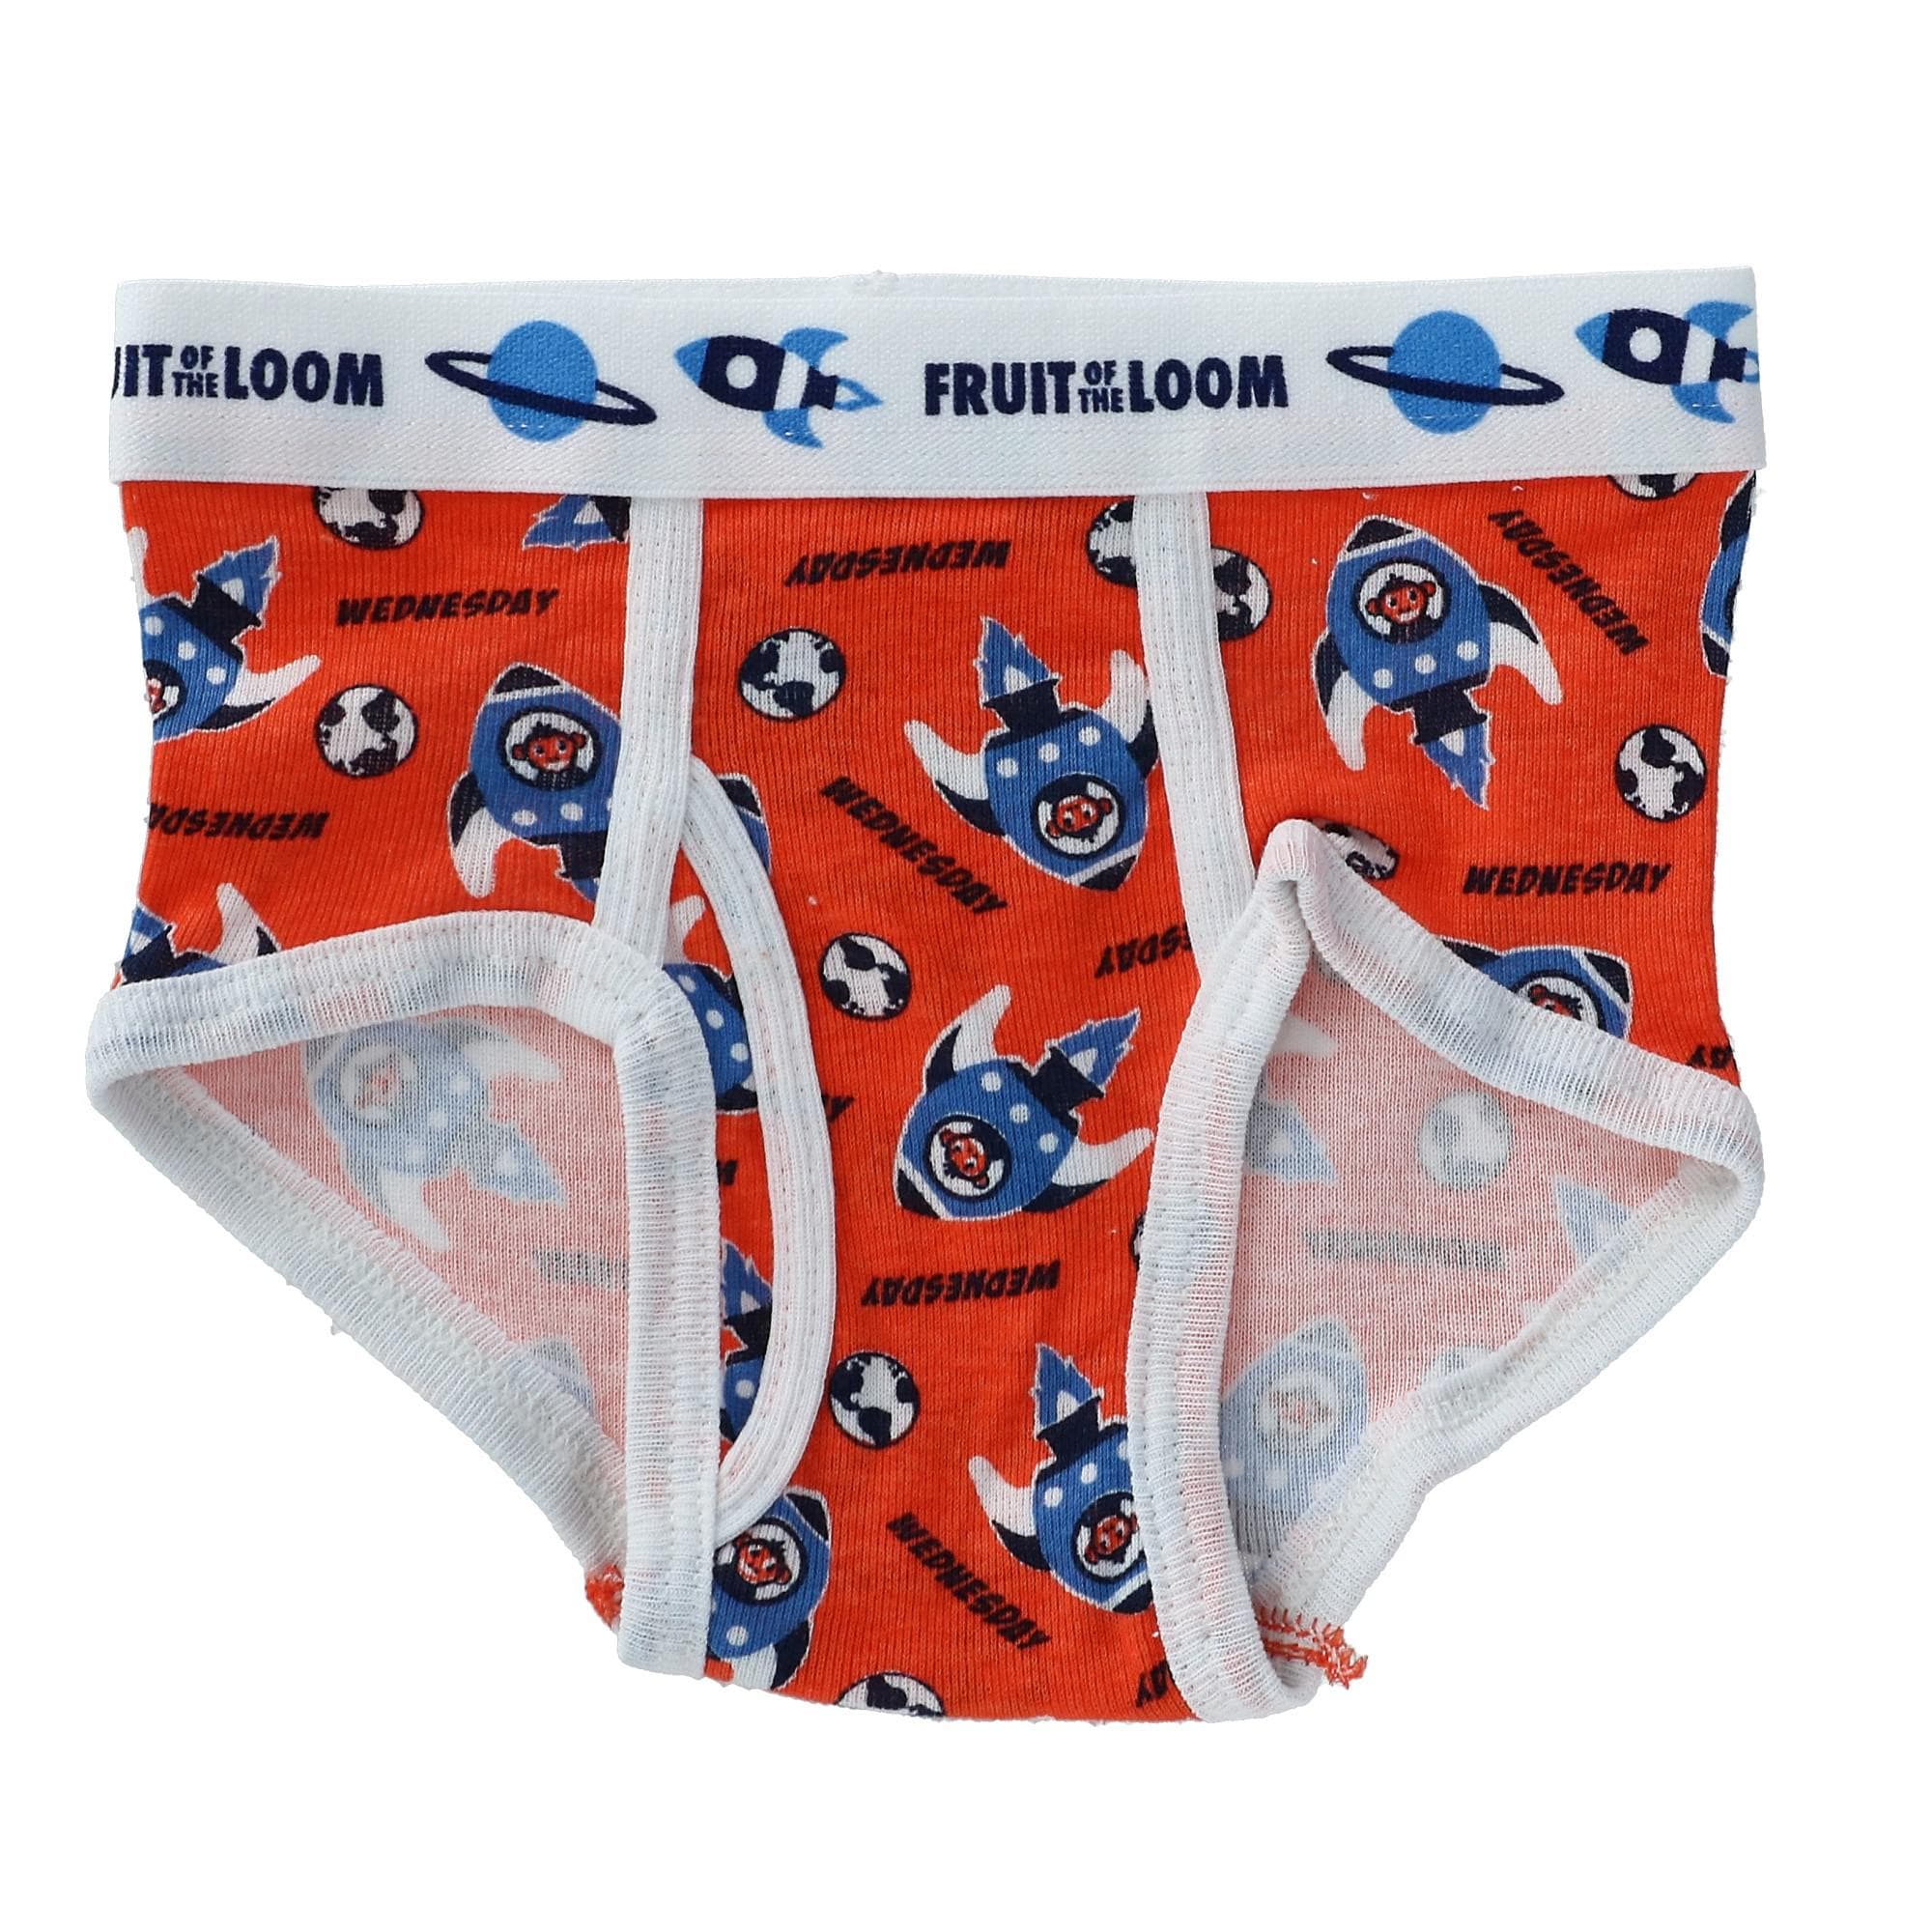 Fruit of The Loom Boys Set of 4 Briefs size small